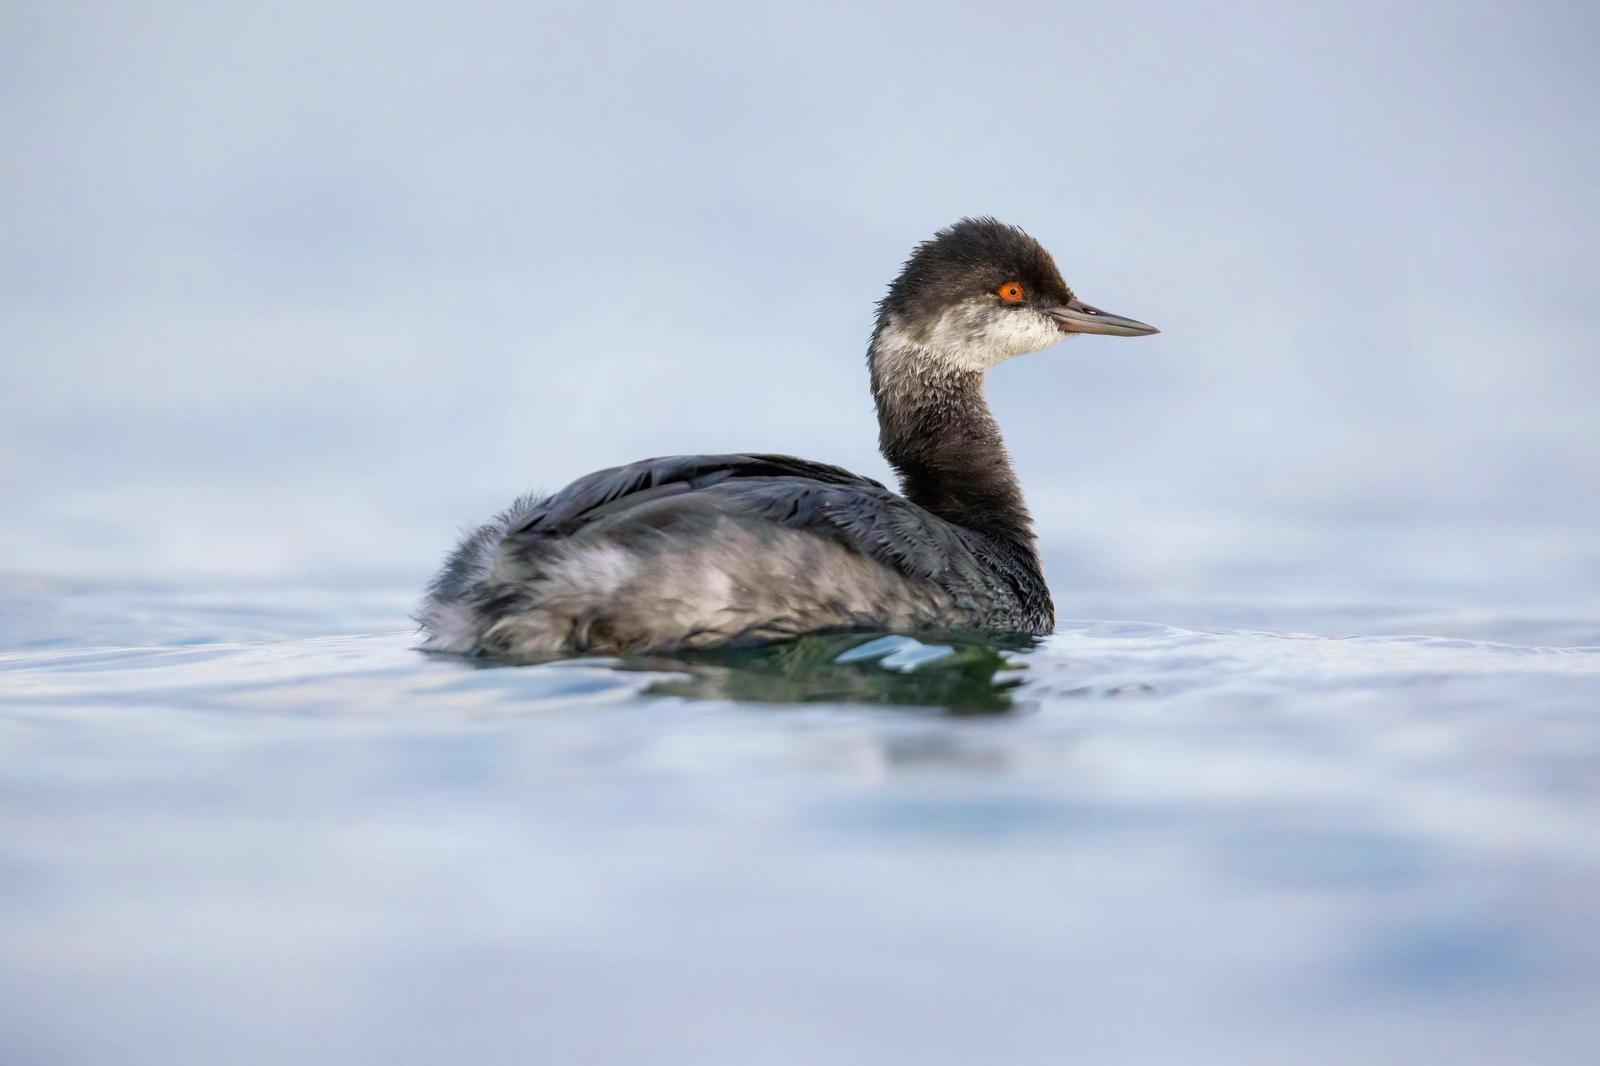 Eared Grebe Photo by Tom Ford-Hutchinson